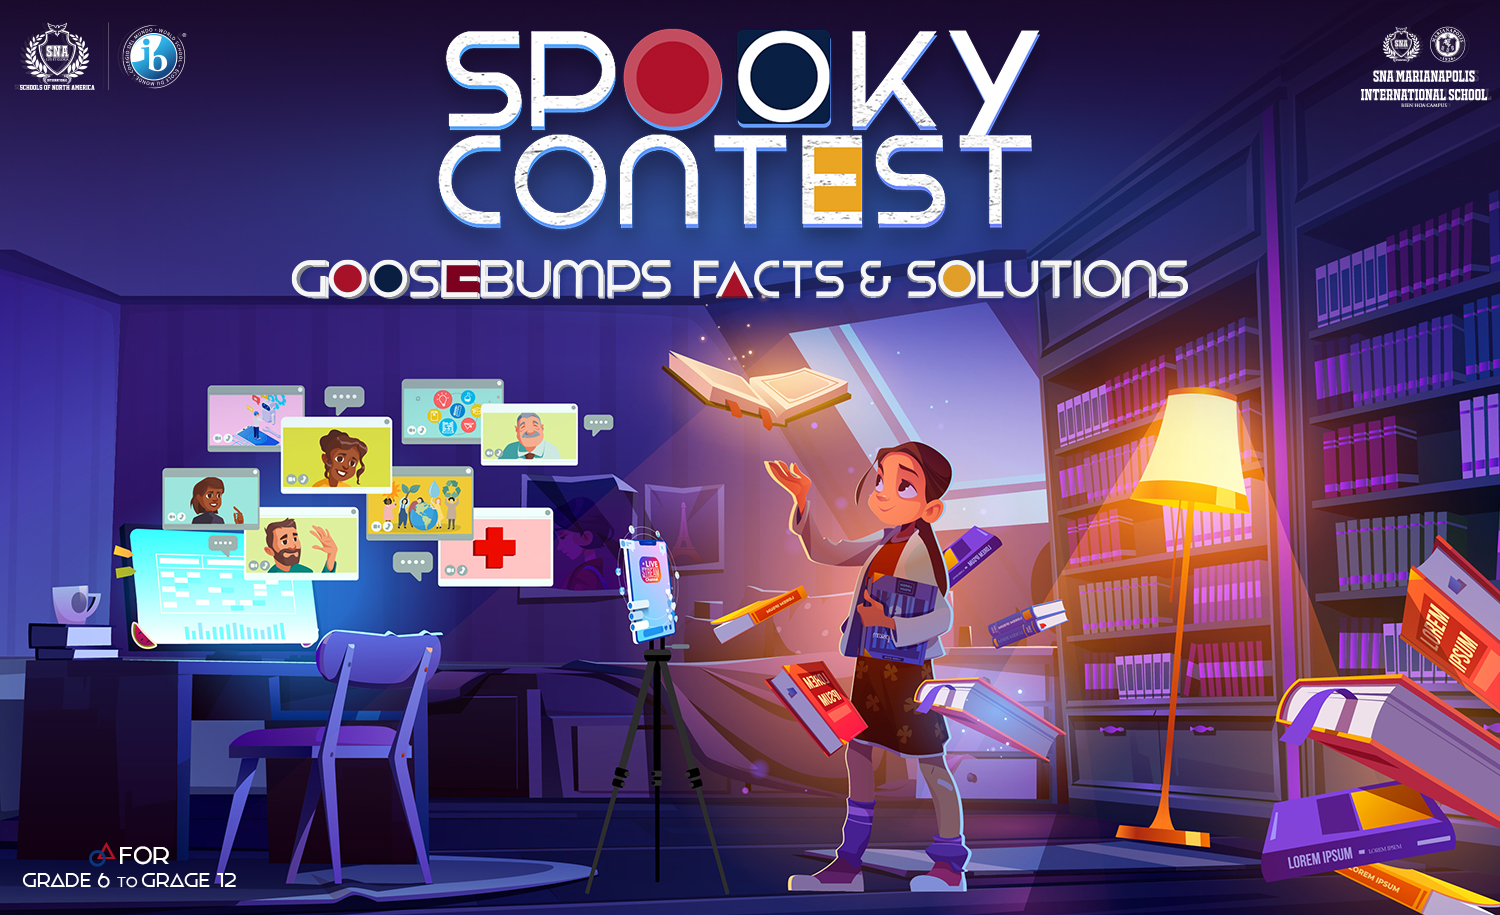 SNA INTERNATIONAL SCHOOLS KICKS-OFF SPOOKY CONTEST: “GOOSEBUMP FACTS AND  SOLUTIONS” FOR HIGH SCHOOL STUDENTS - SNA Marianapolis